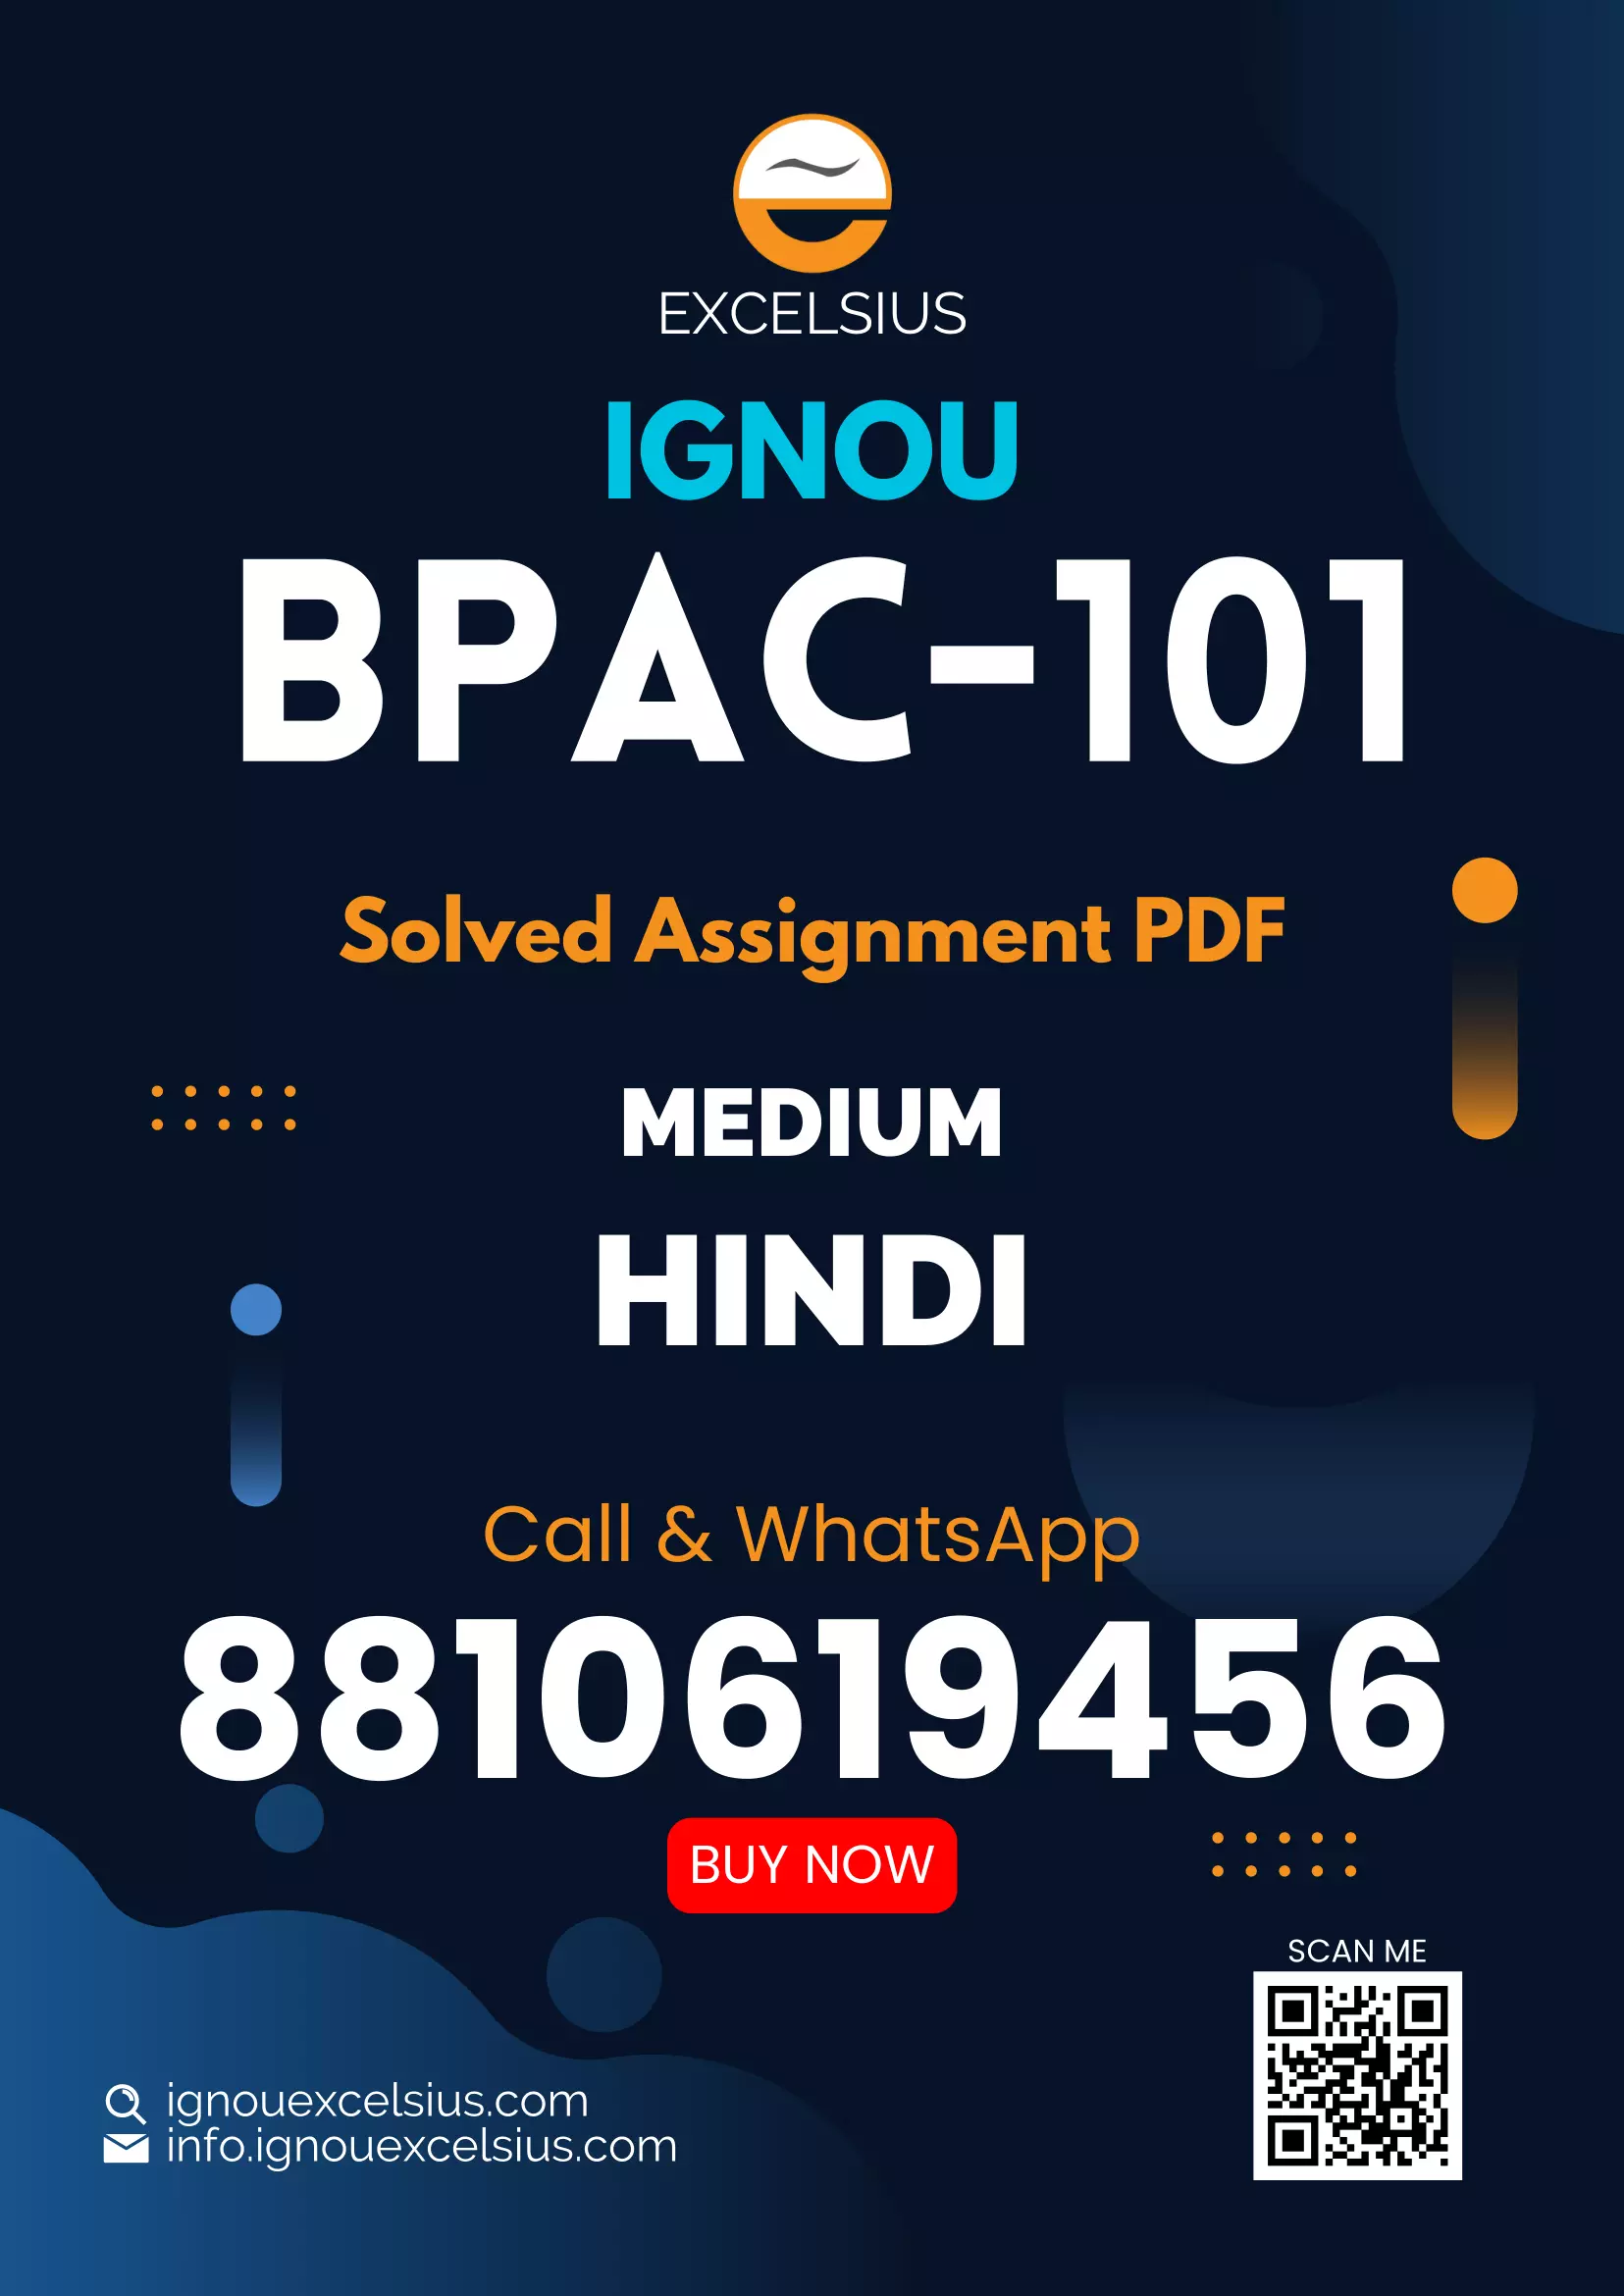 IGNOU BPAC-101(BAFPA) - Perspectives on Public Administration Latest Solved Assignment-January 2024 - July 2024